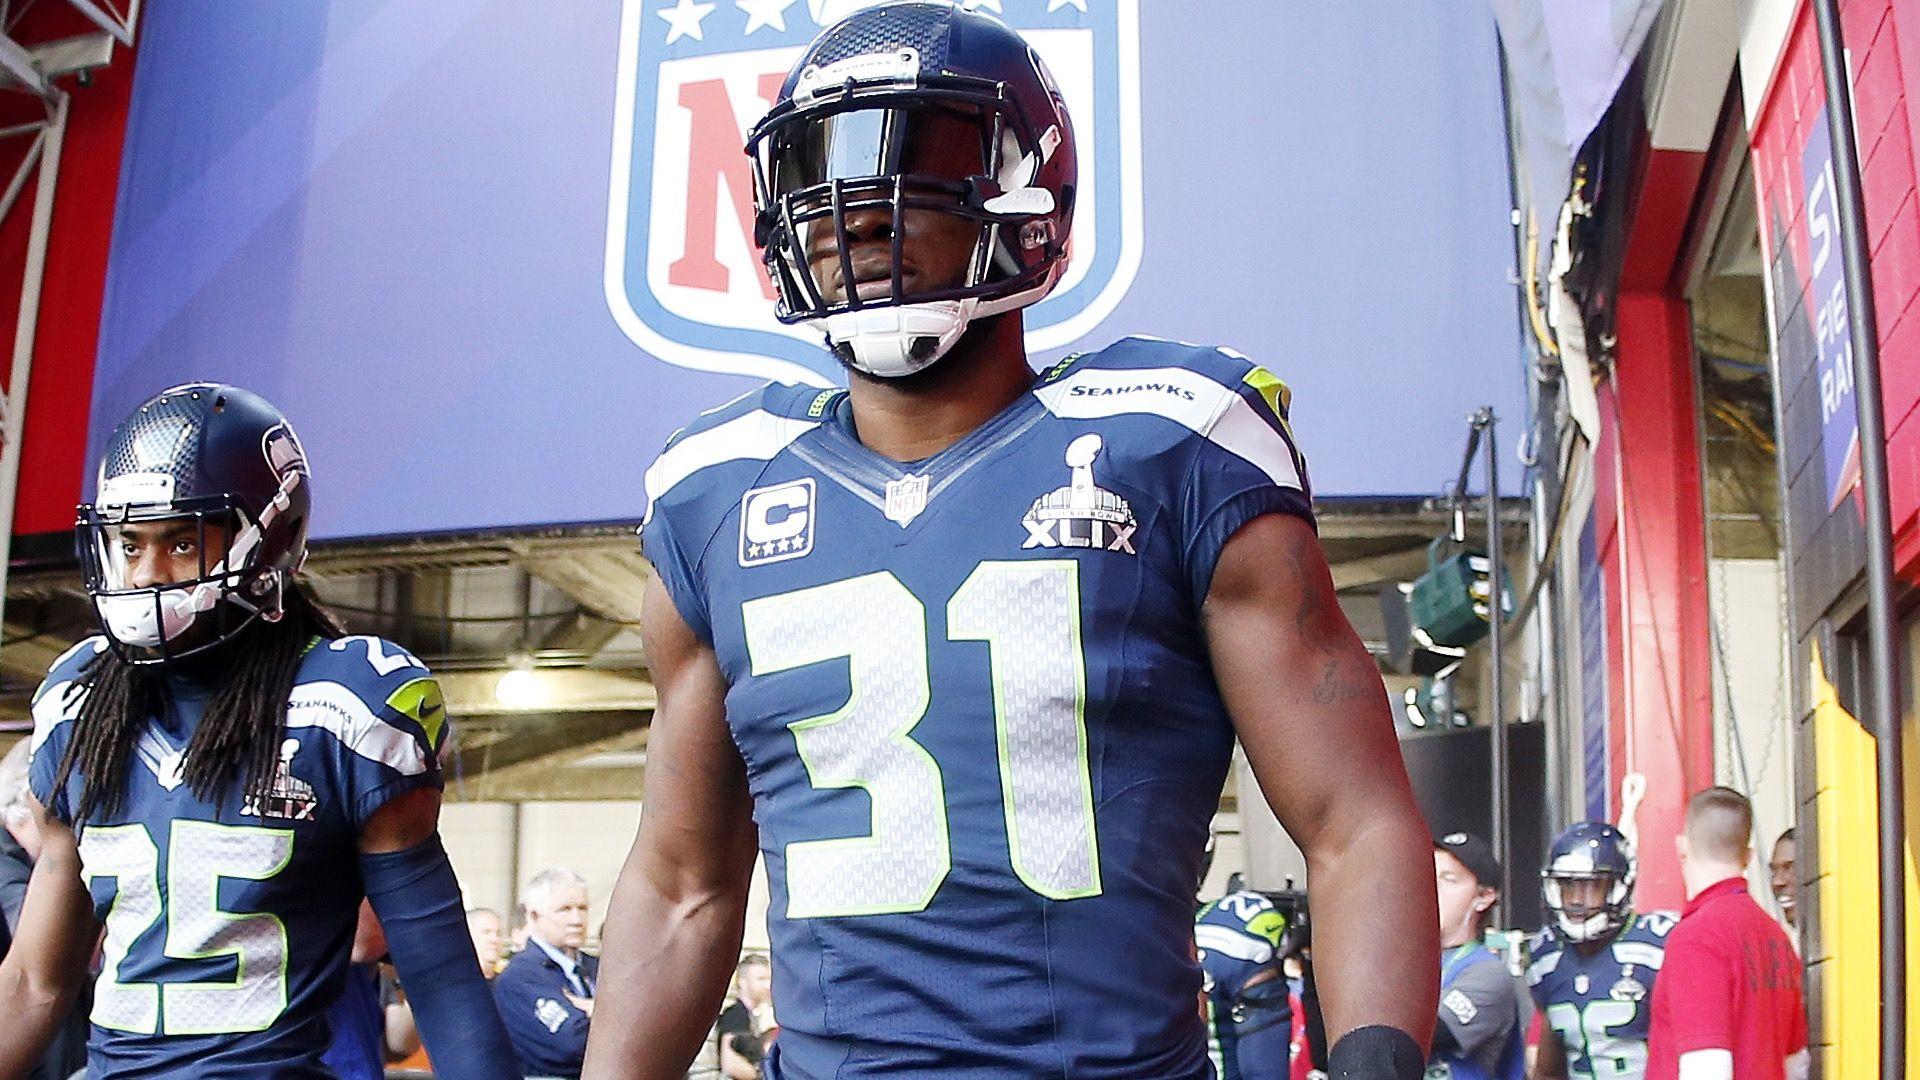 Seahawks' Kam Chancellor played in Super Bowl with MCL tear. NFL